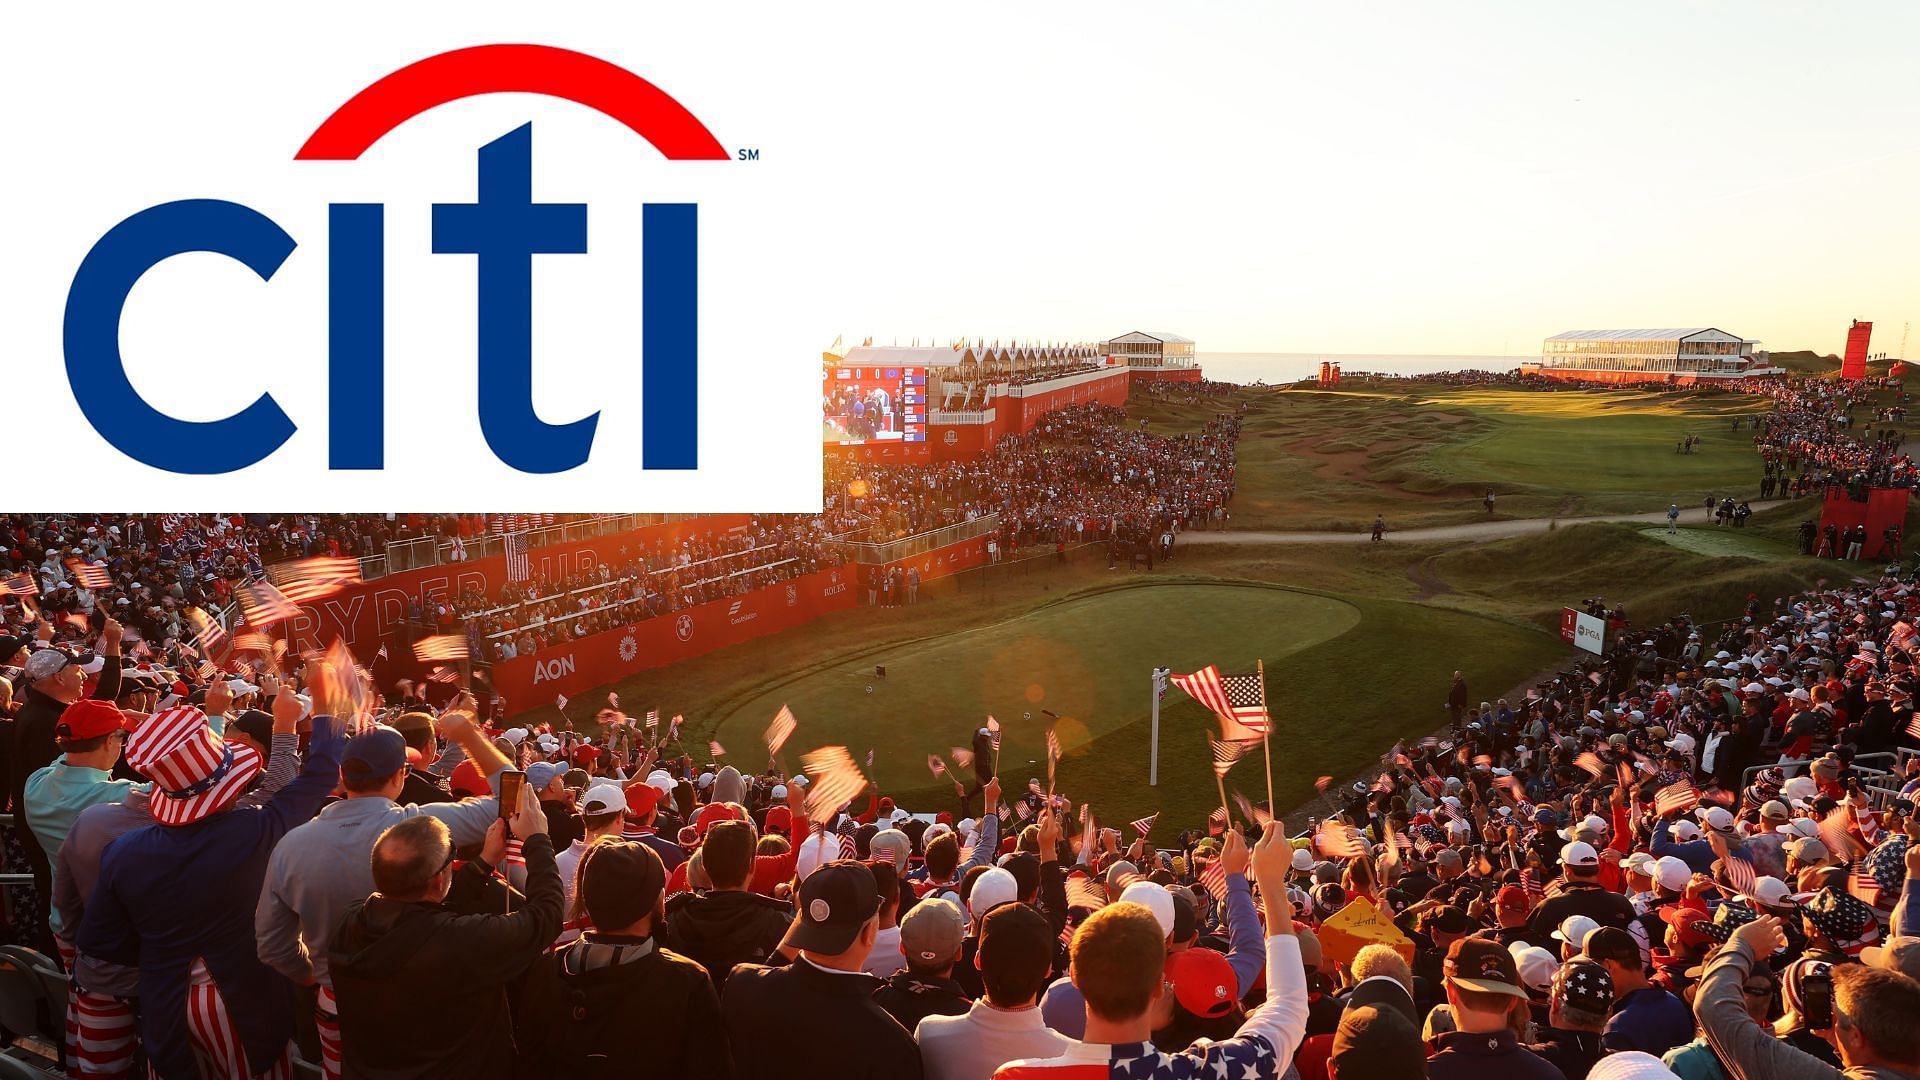 Citi secures major Ryder Cup partnership as official Worldwide Partner